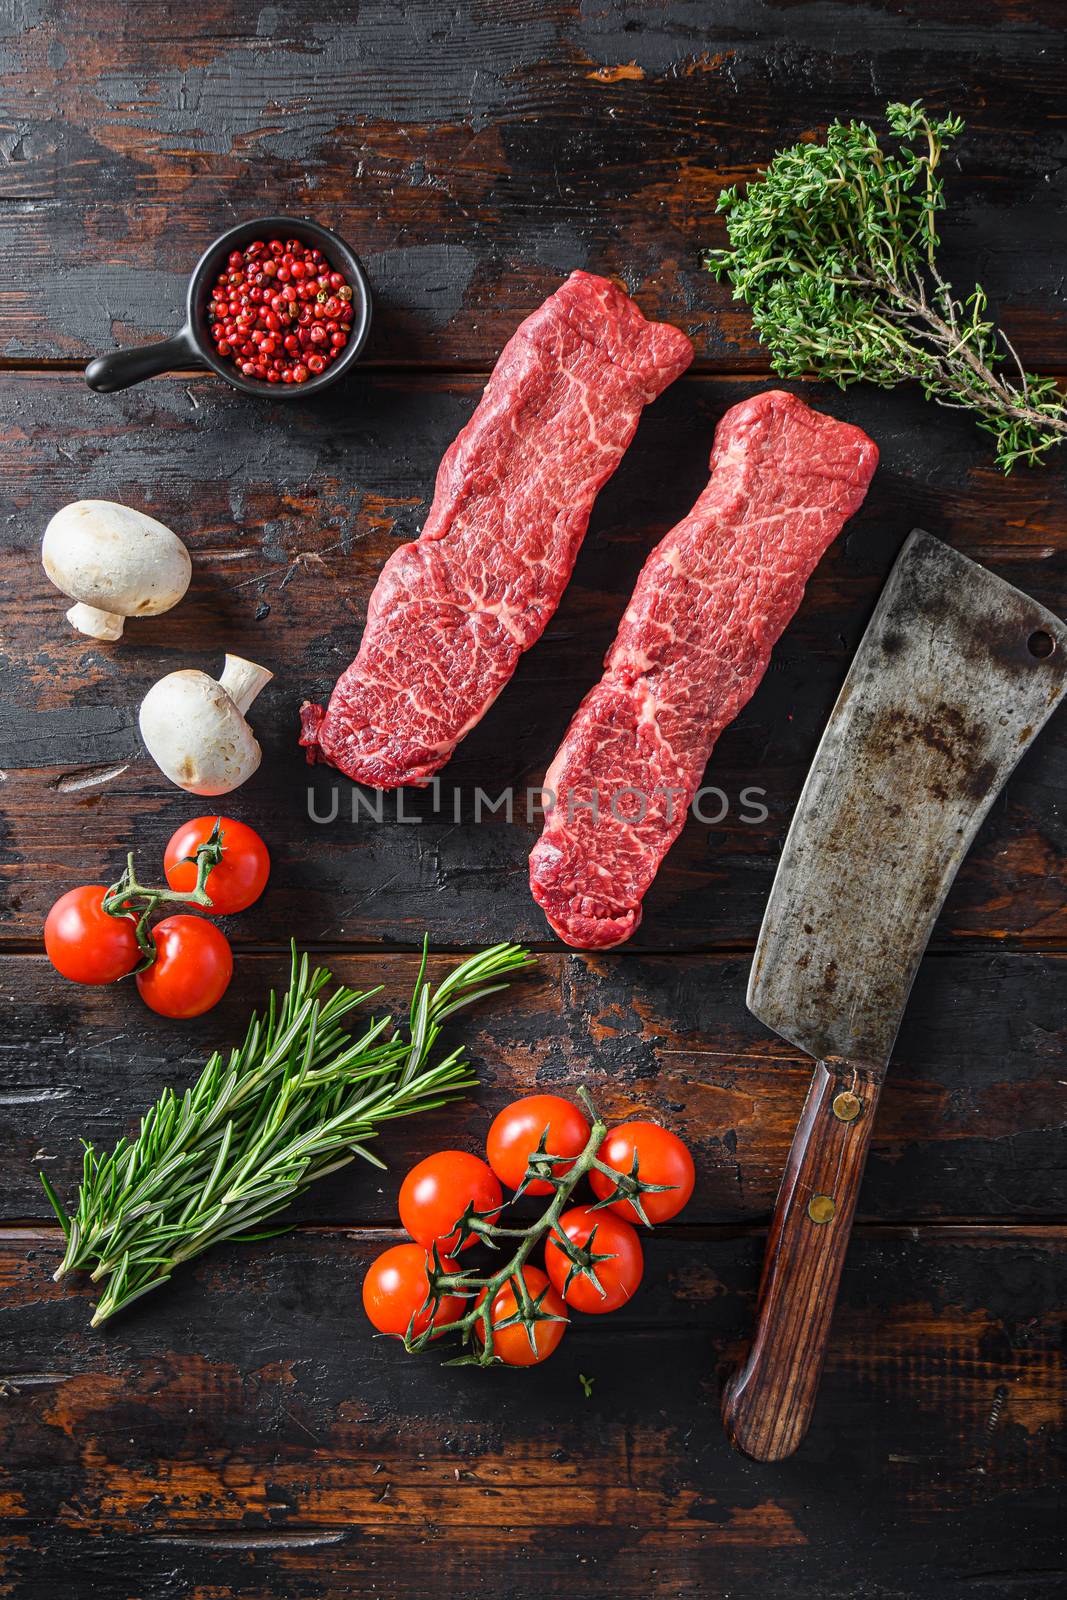 Organic denver steak, raw meat, marbled black angus beef cut on metal butcher cleaver knife with rosemary and farm herbs over old wood table background top view by Ilianesolenyi